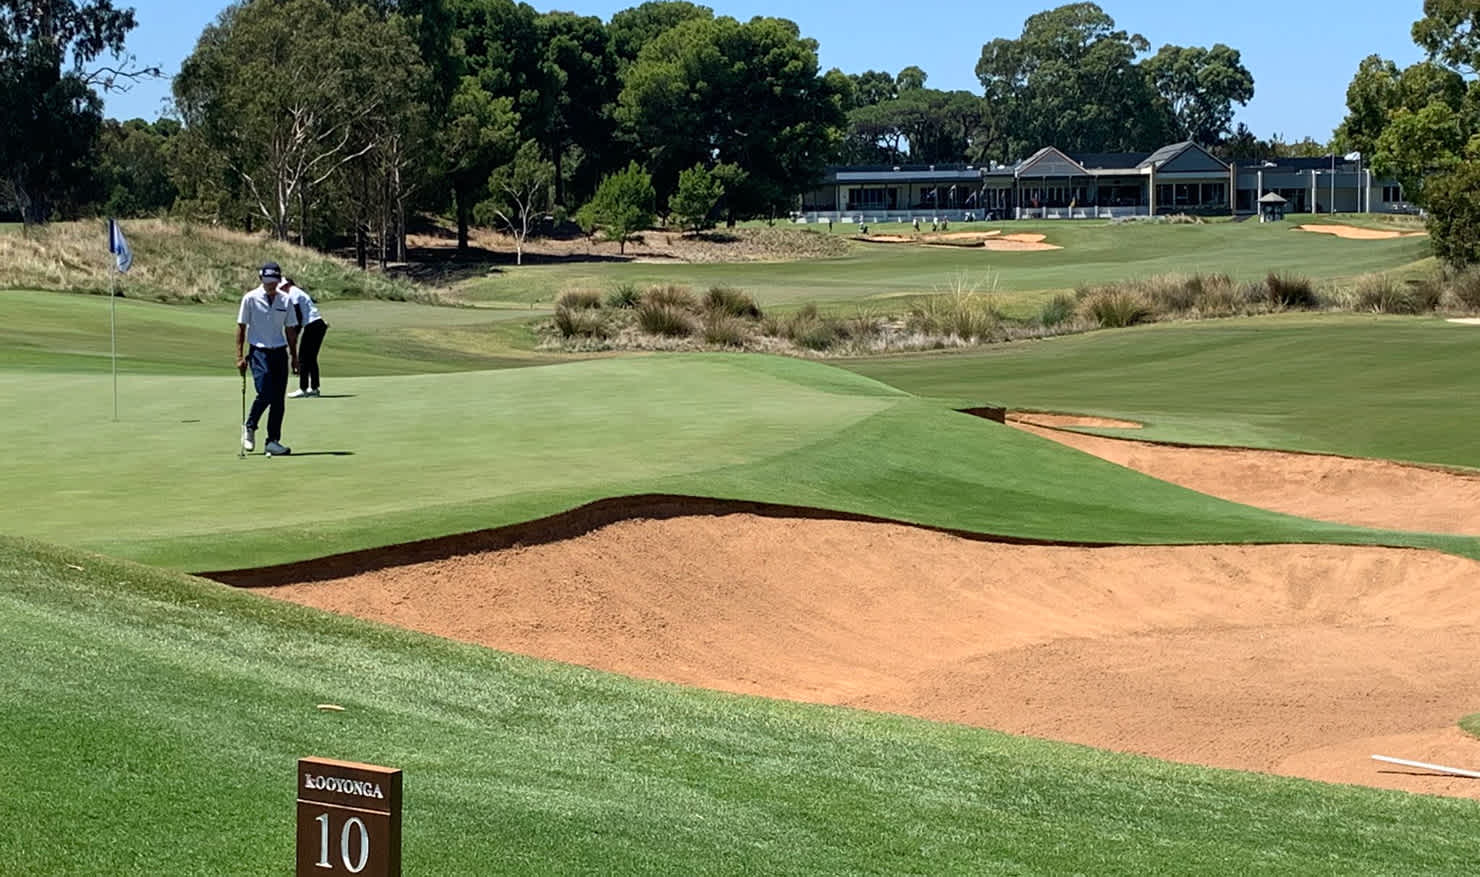 Not a blade of grass or grain of sand seems out of place at Kooyonga in today's practice round.